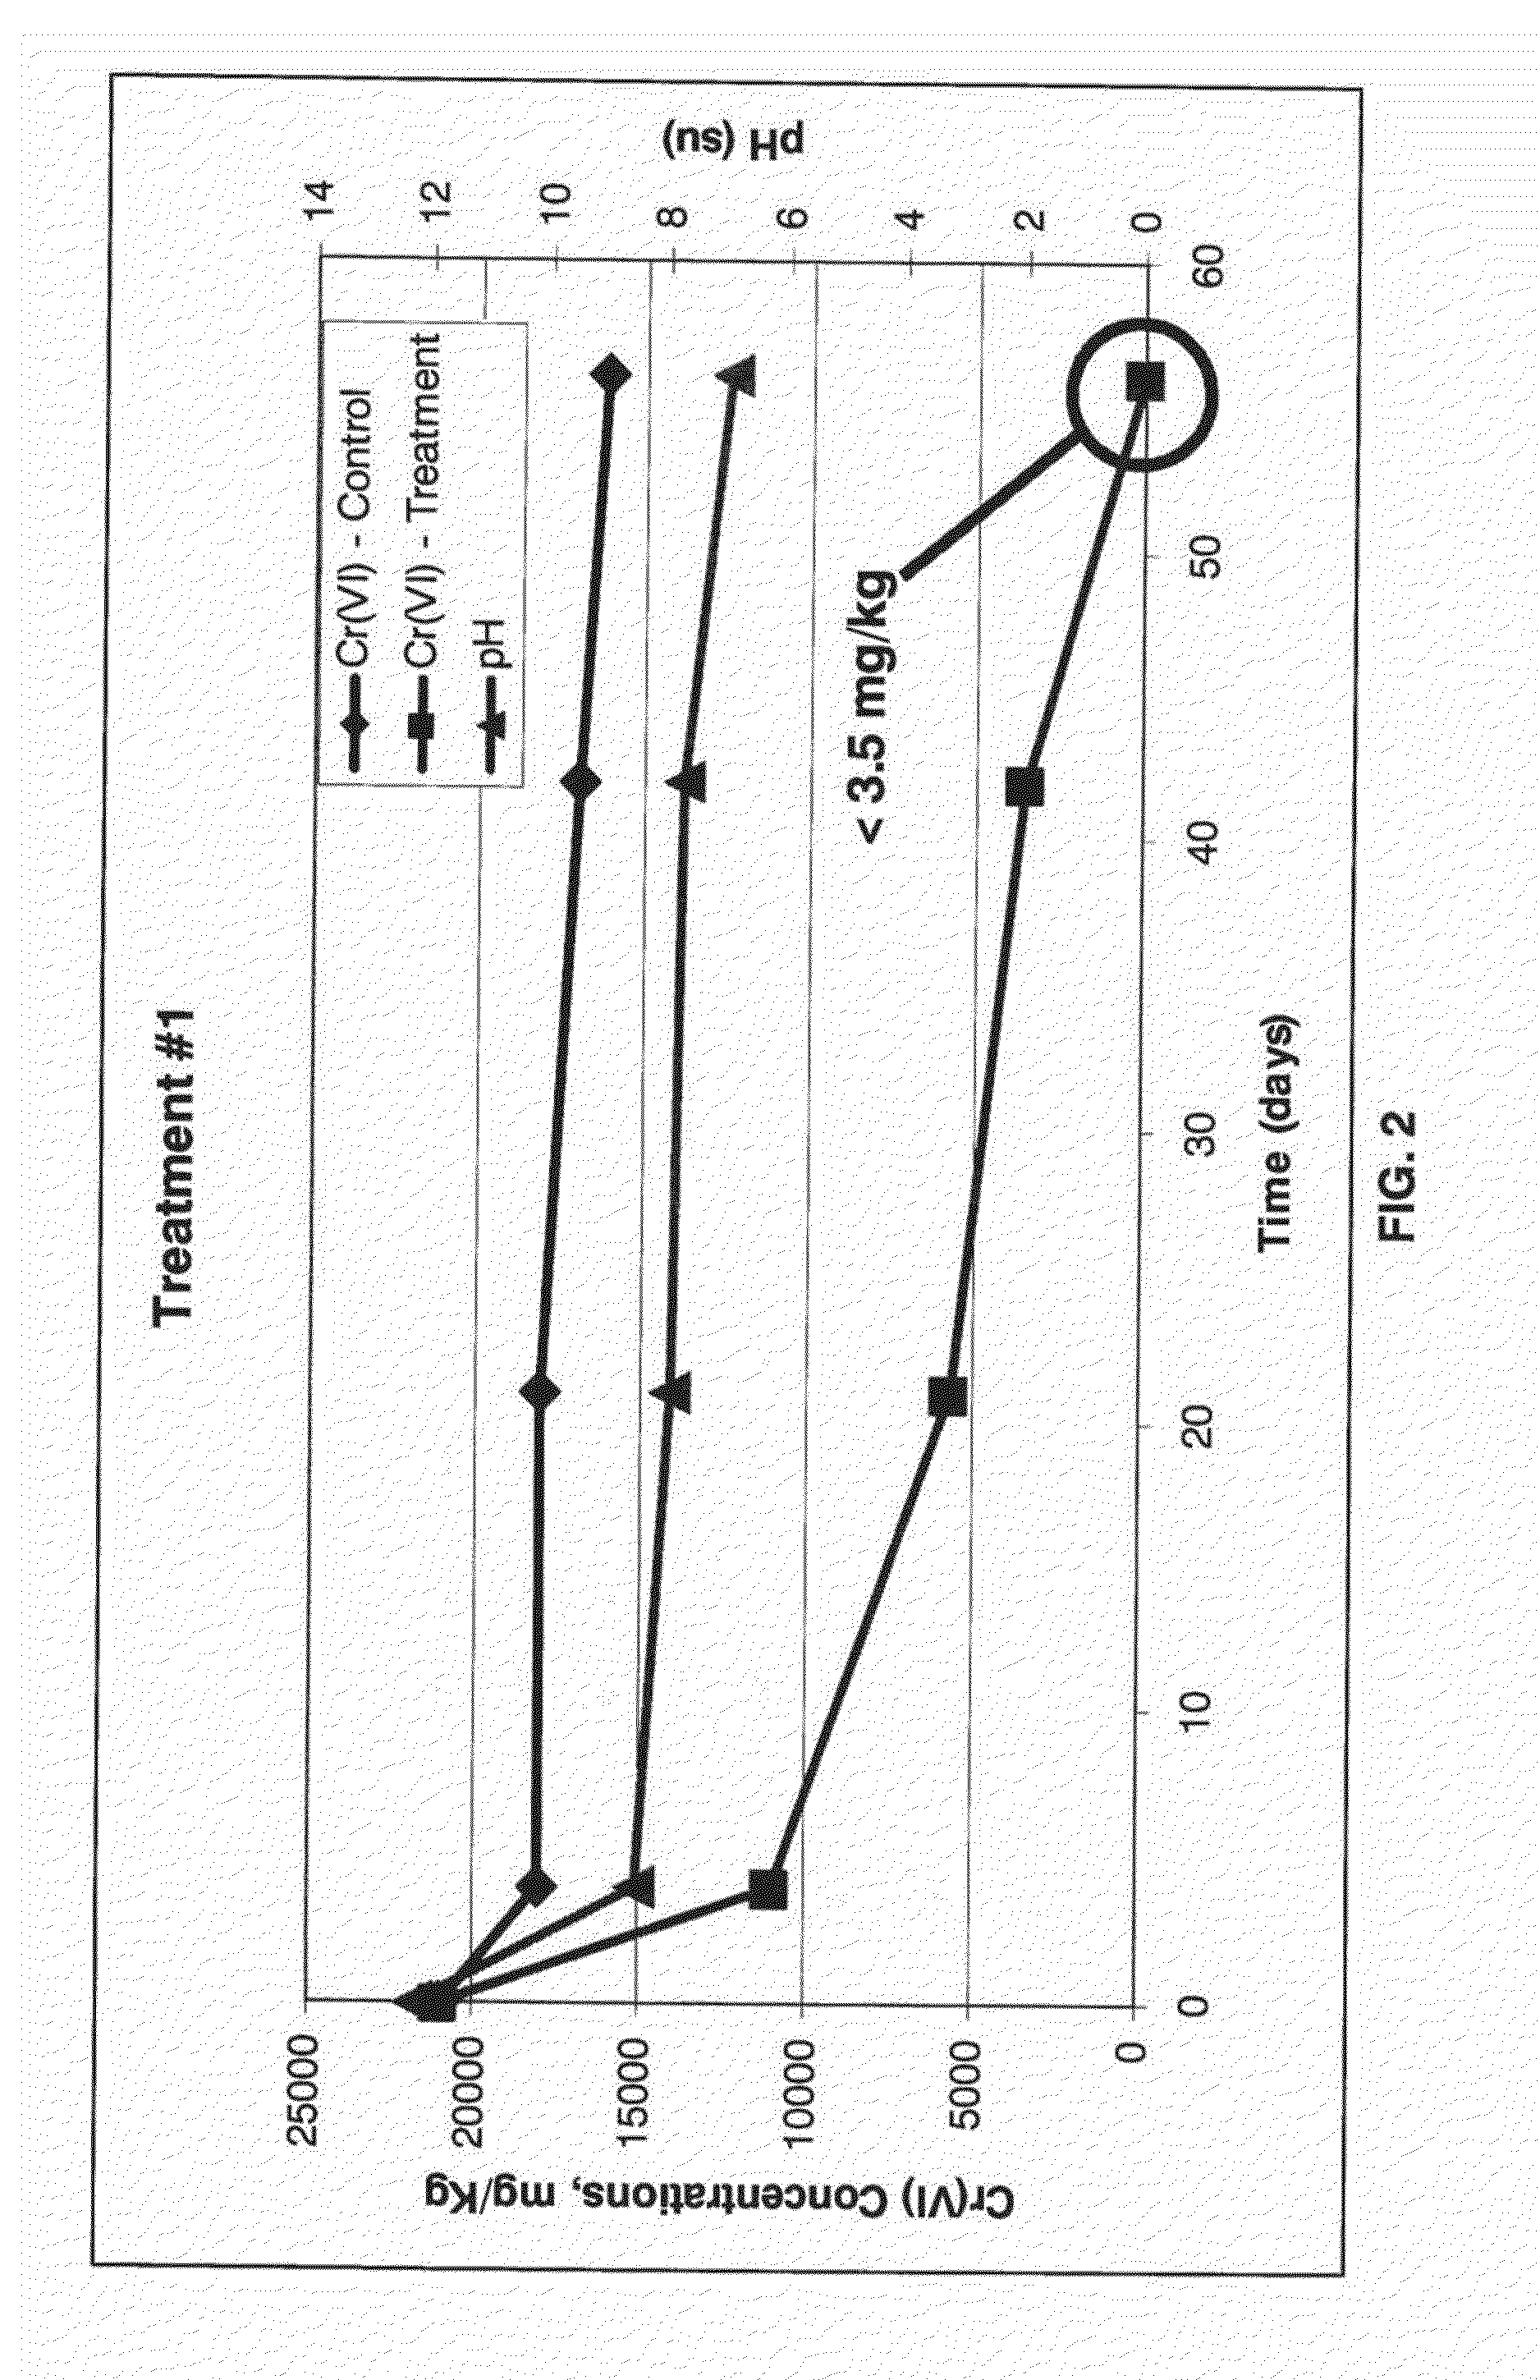 System and Method For Biogeochemical Stabilization of Chromate-Impacted Solids, Including Chromite Ore Processing Residue (COPR)